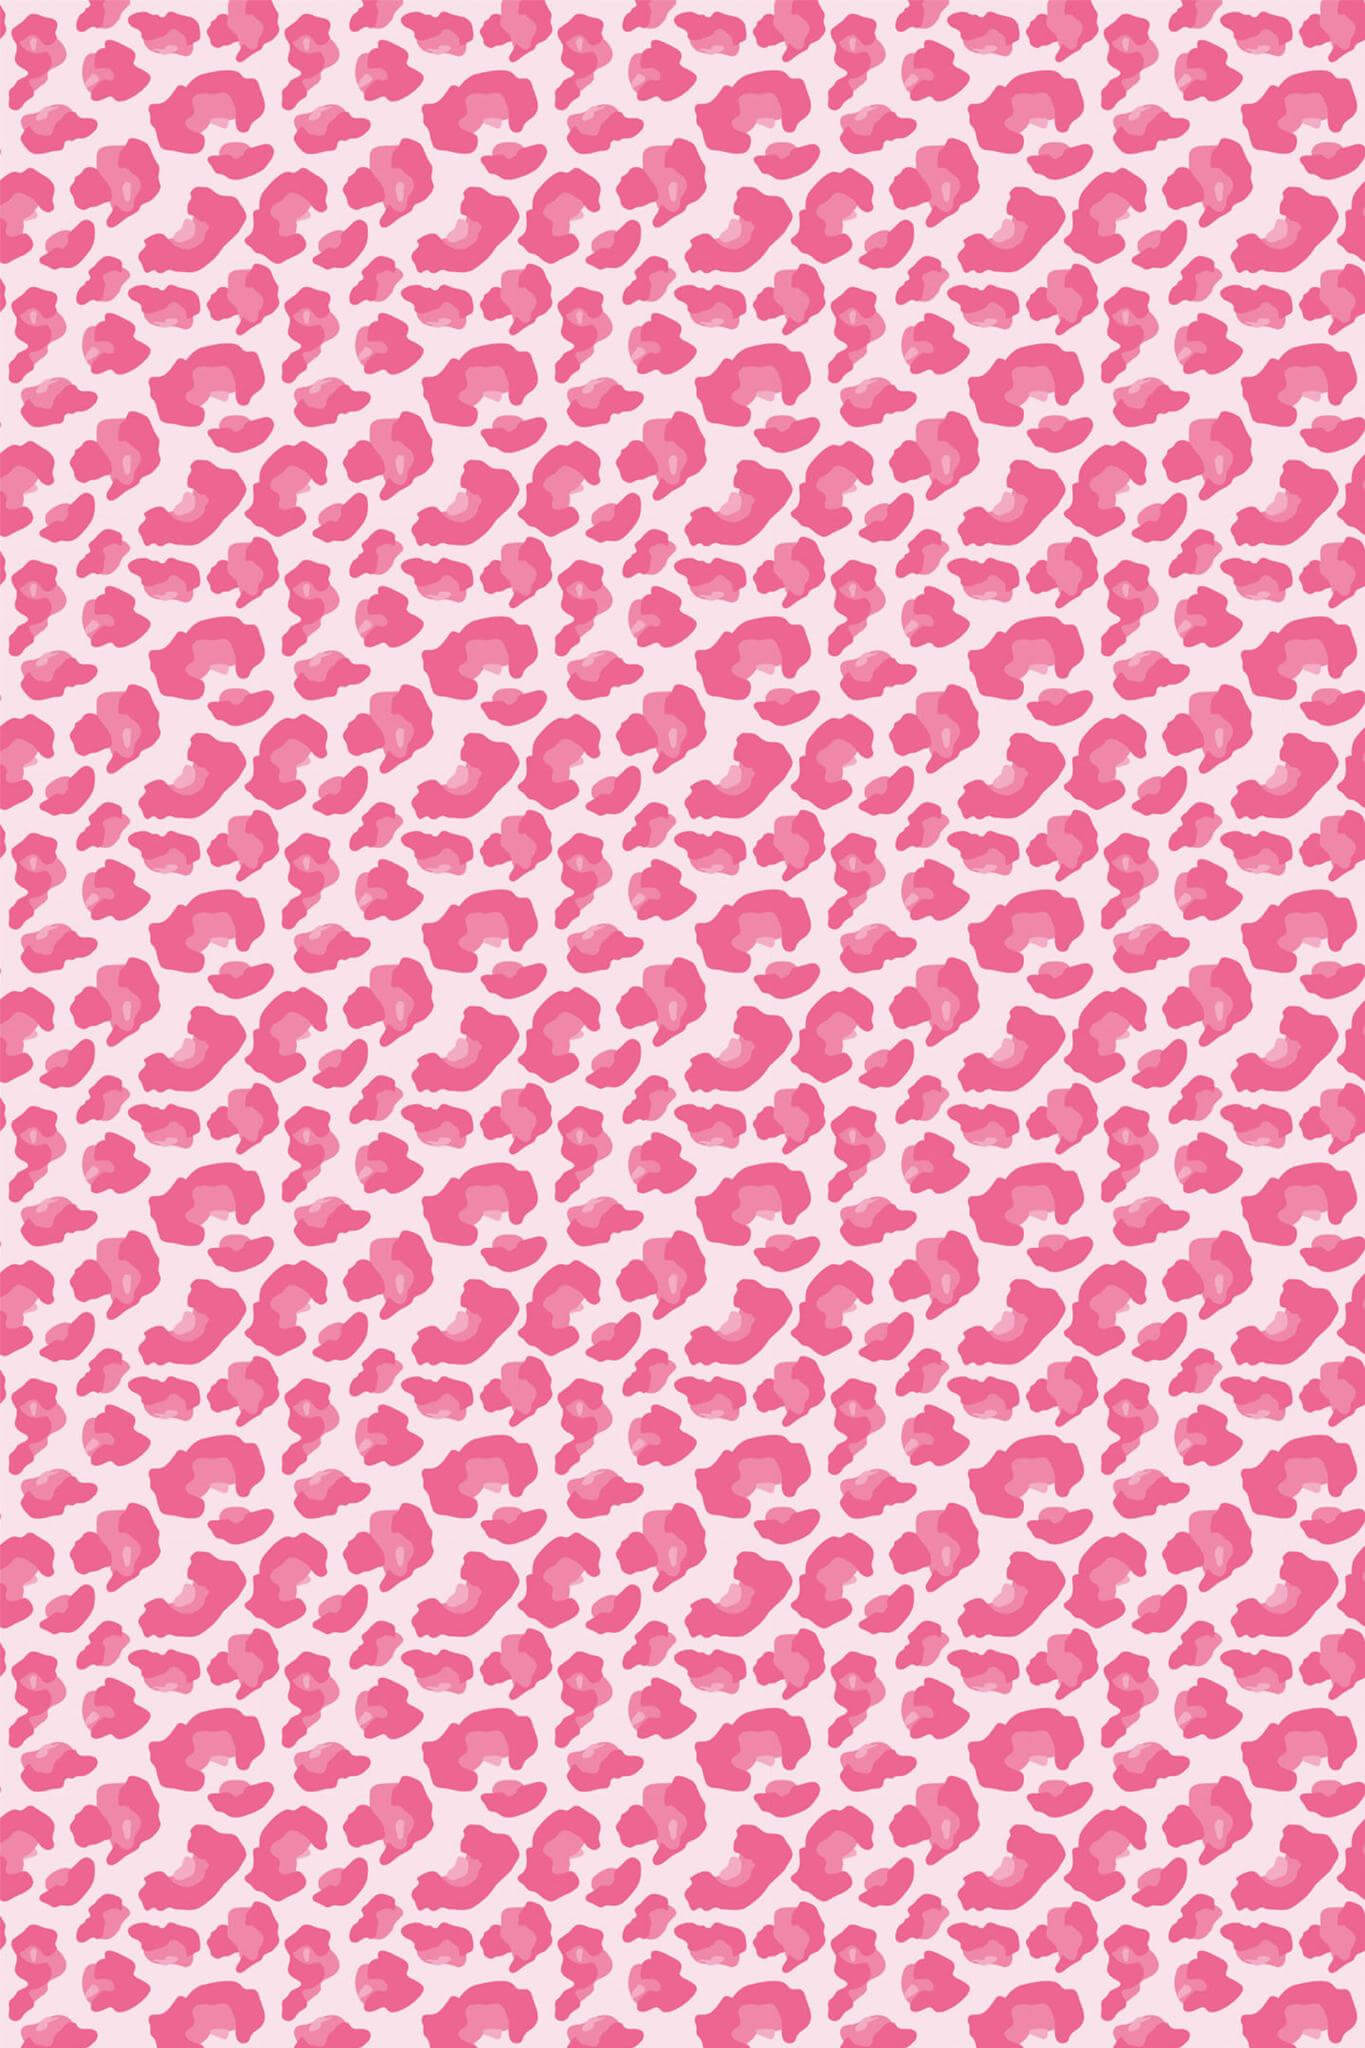 Pink cheetah print Wallpaper - Peel and Stick or Non-Pasted